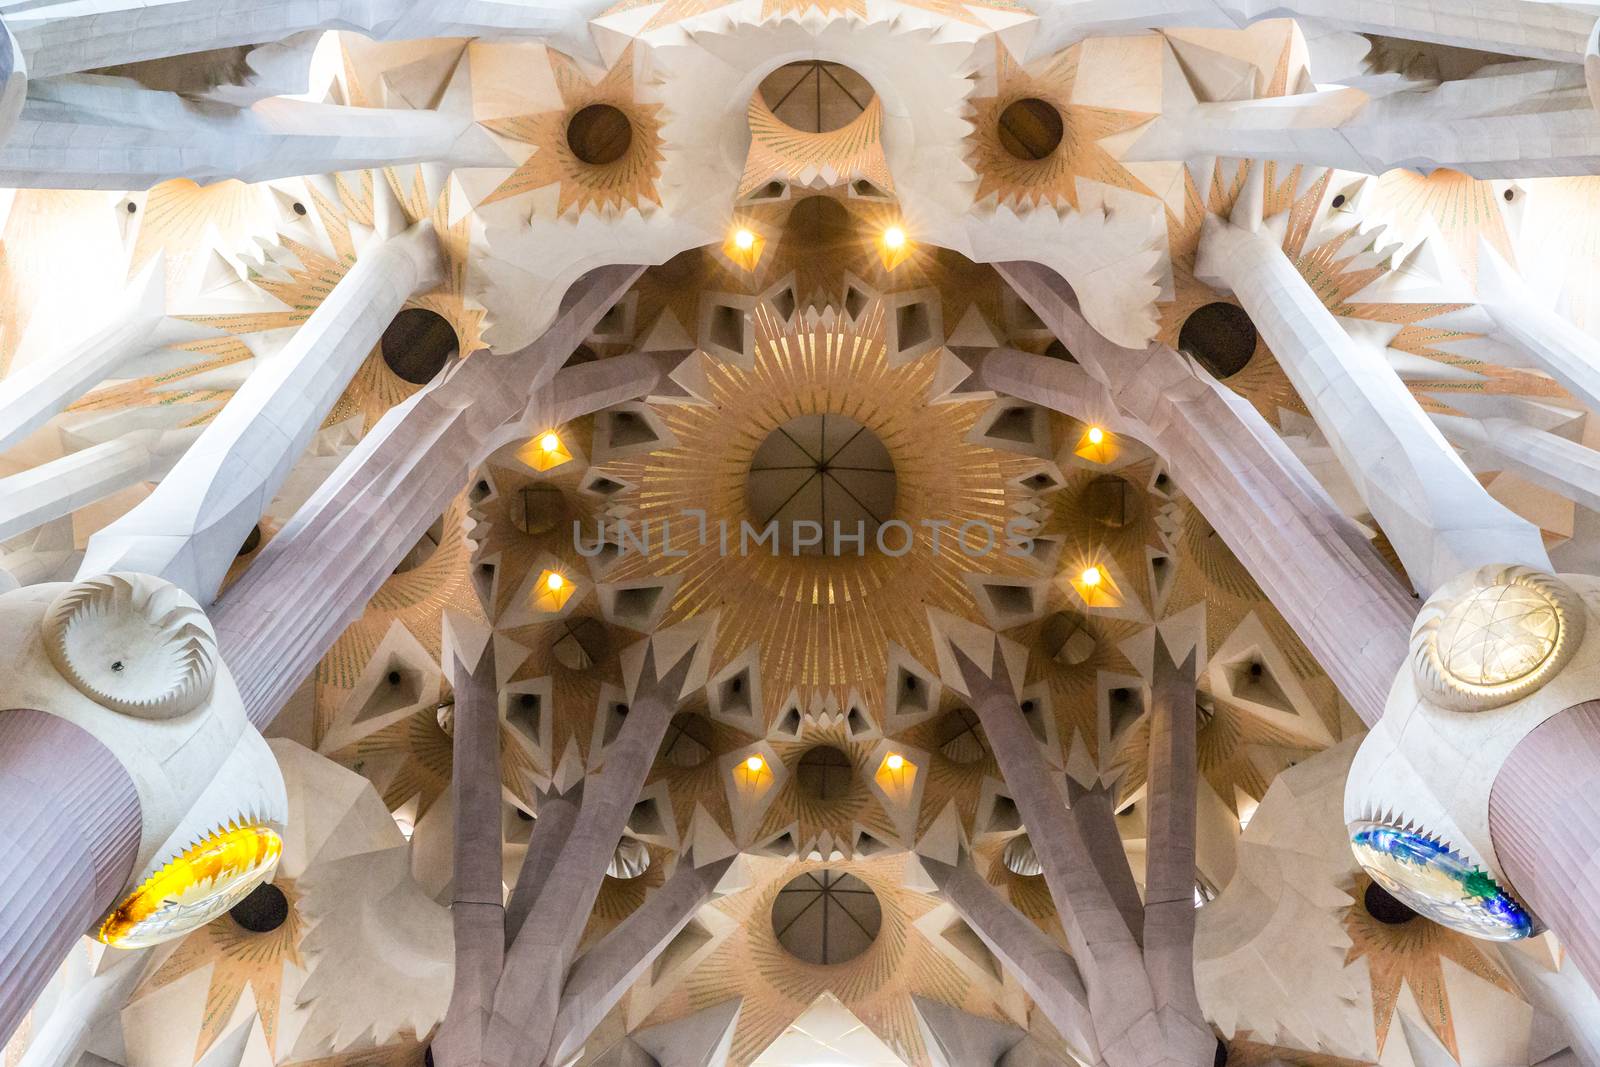 Barcelona, Spain - Jun 10:Interior of  La Sagrada Familia - designed by Gaudi, which is being build since 19 March 1882 and is not finished yet Jun 10, 2014 in Barcelona, Spain.